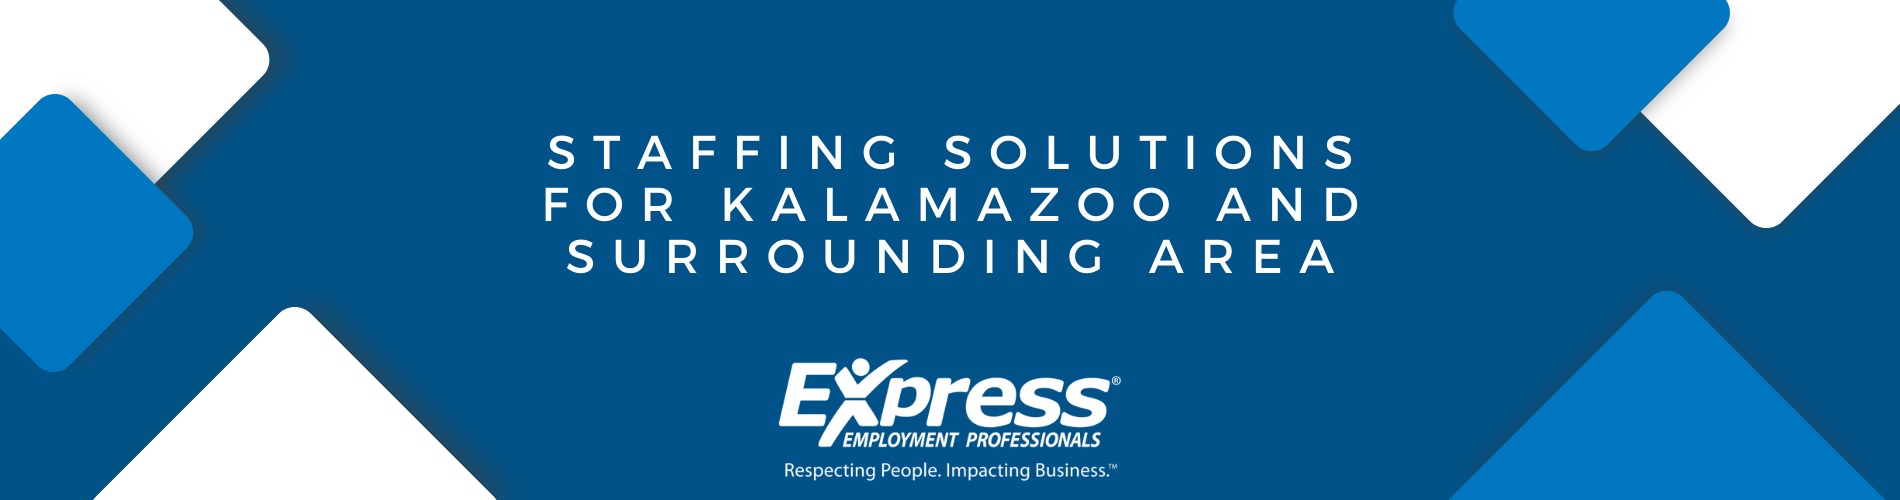 Staffing Solutions Home Banner - Use this